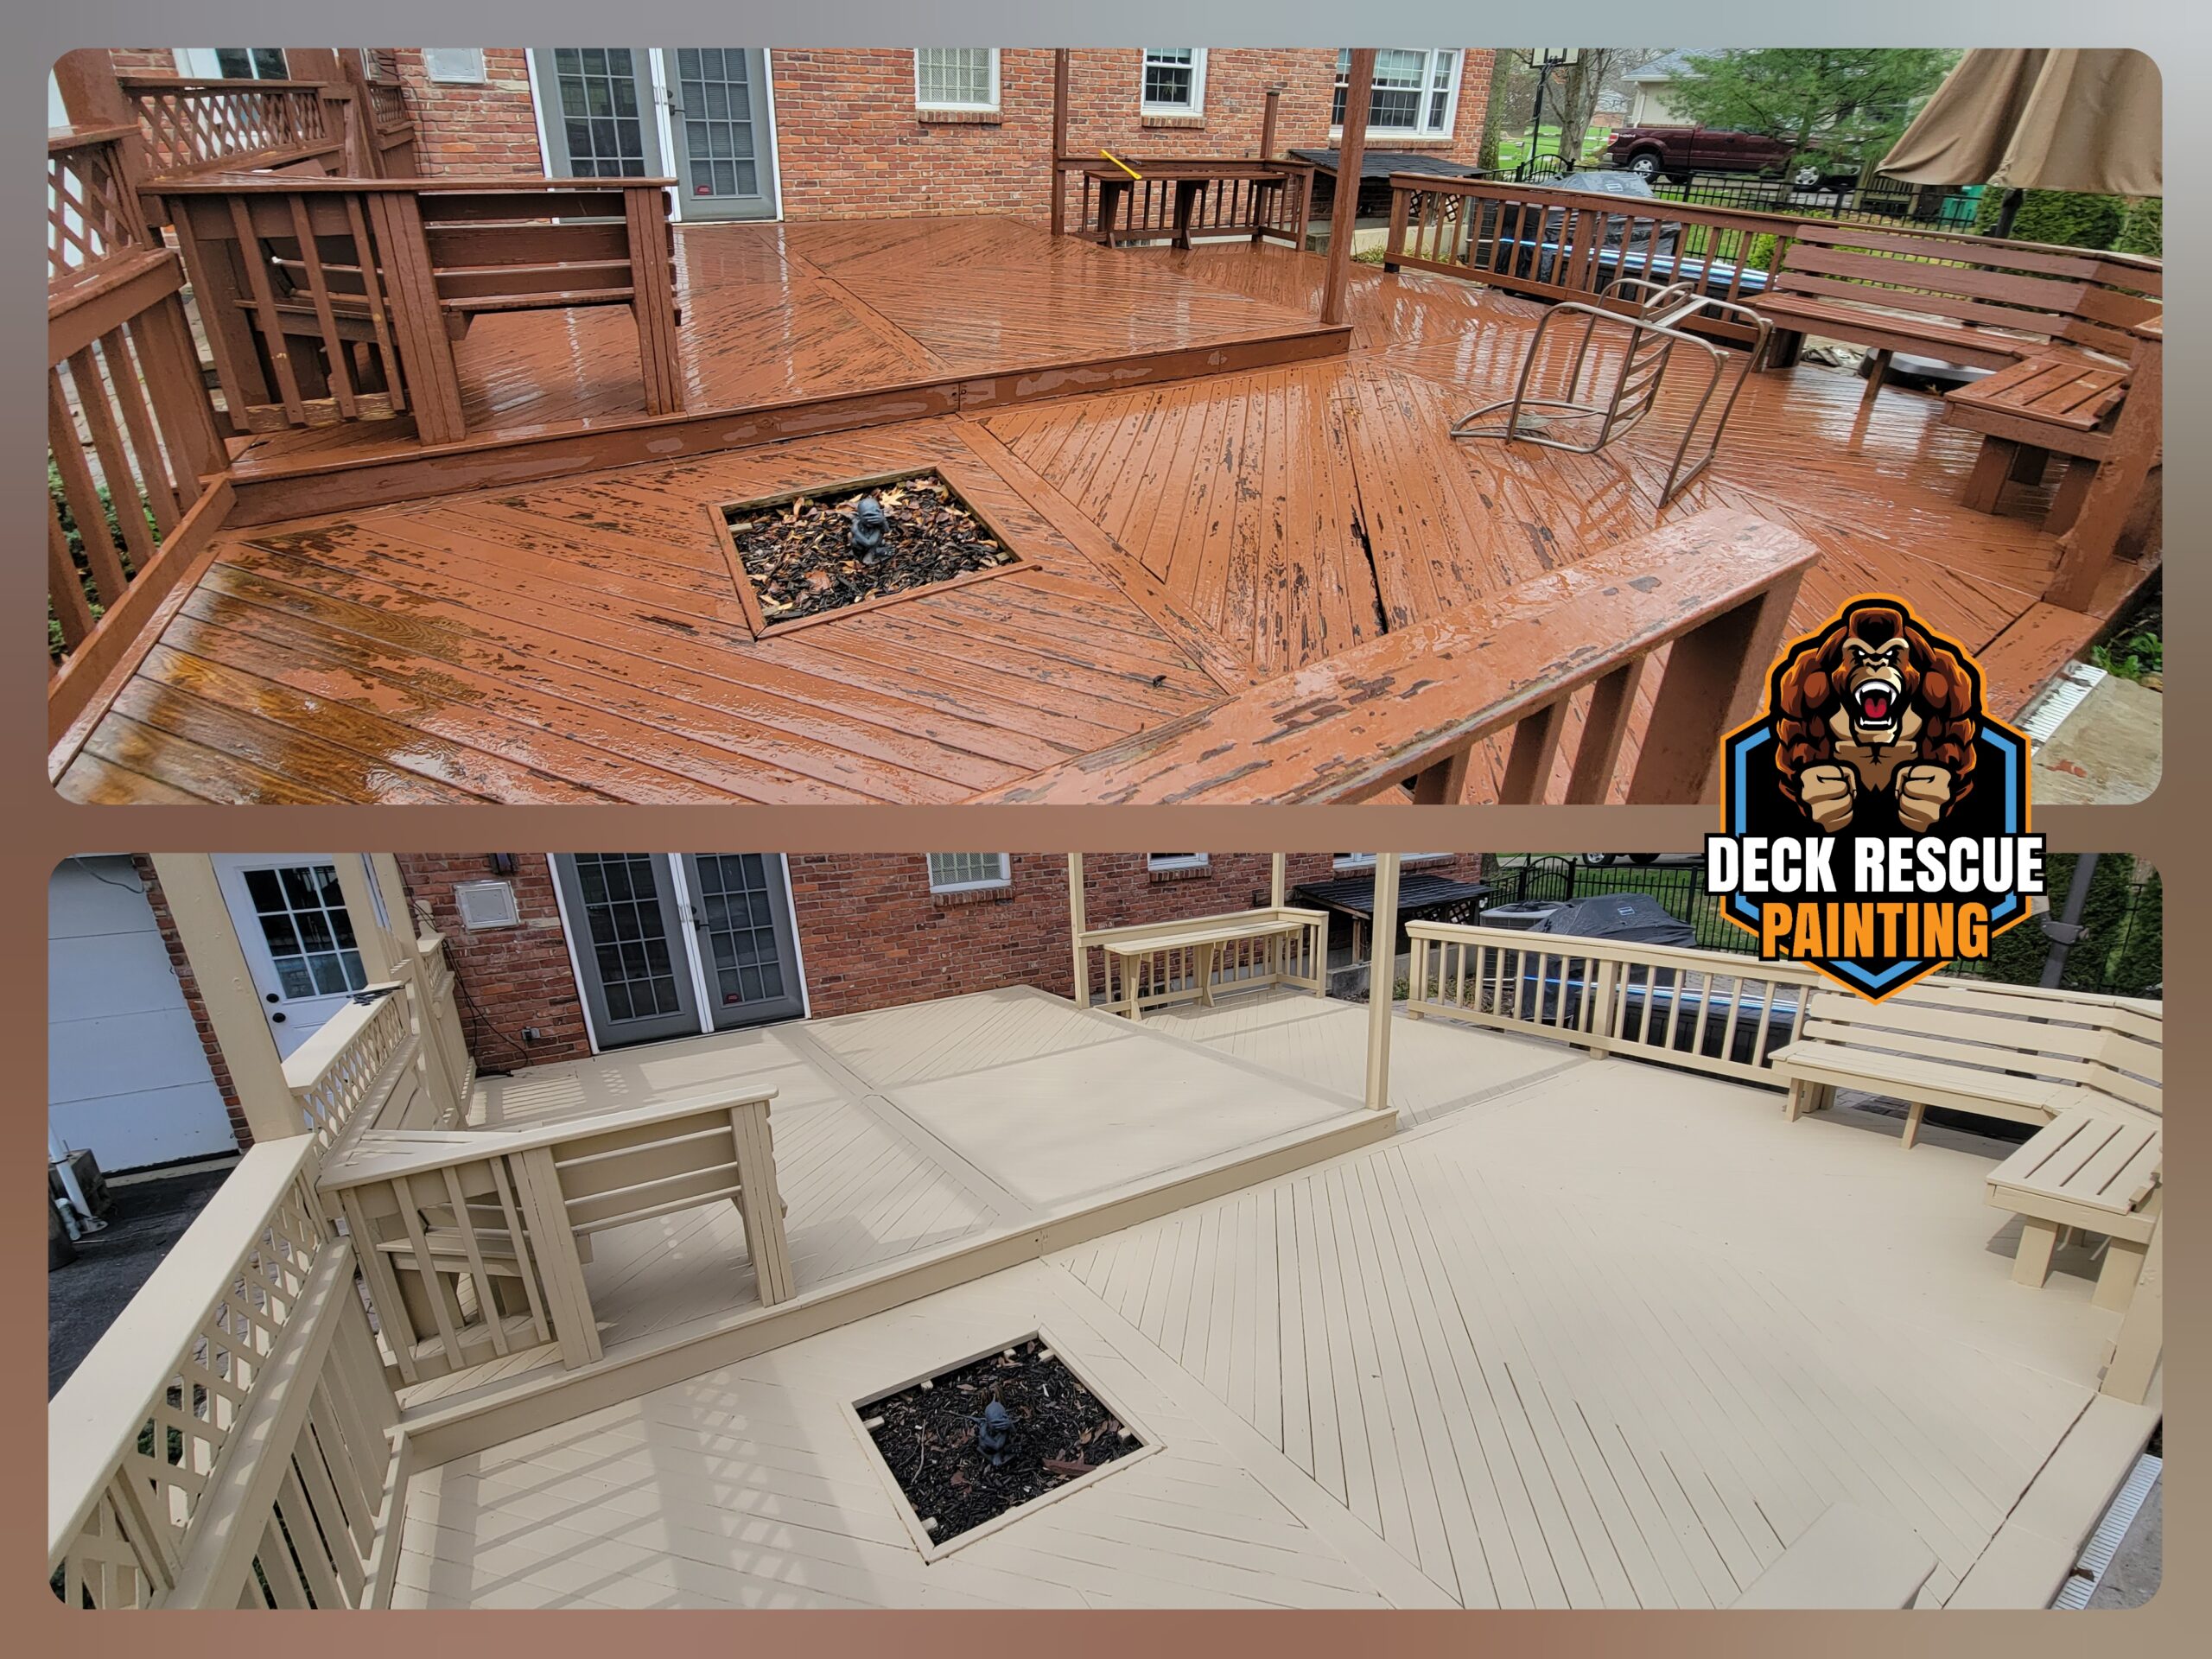 picture before and after Deck Rescue painting from Kong Armor in Loveland Ohio